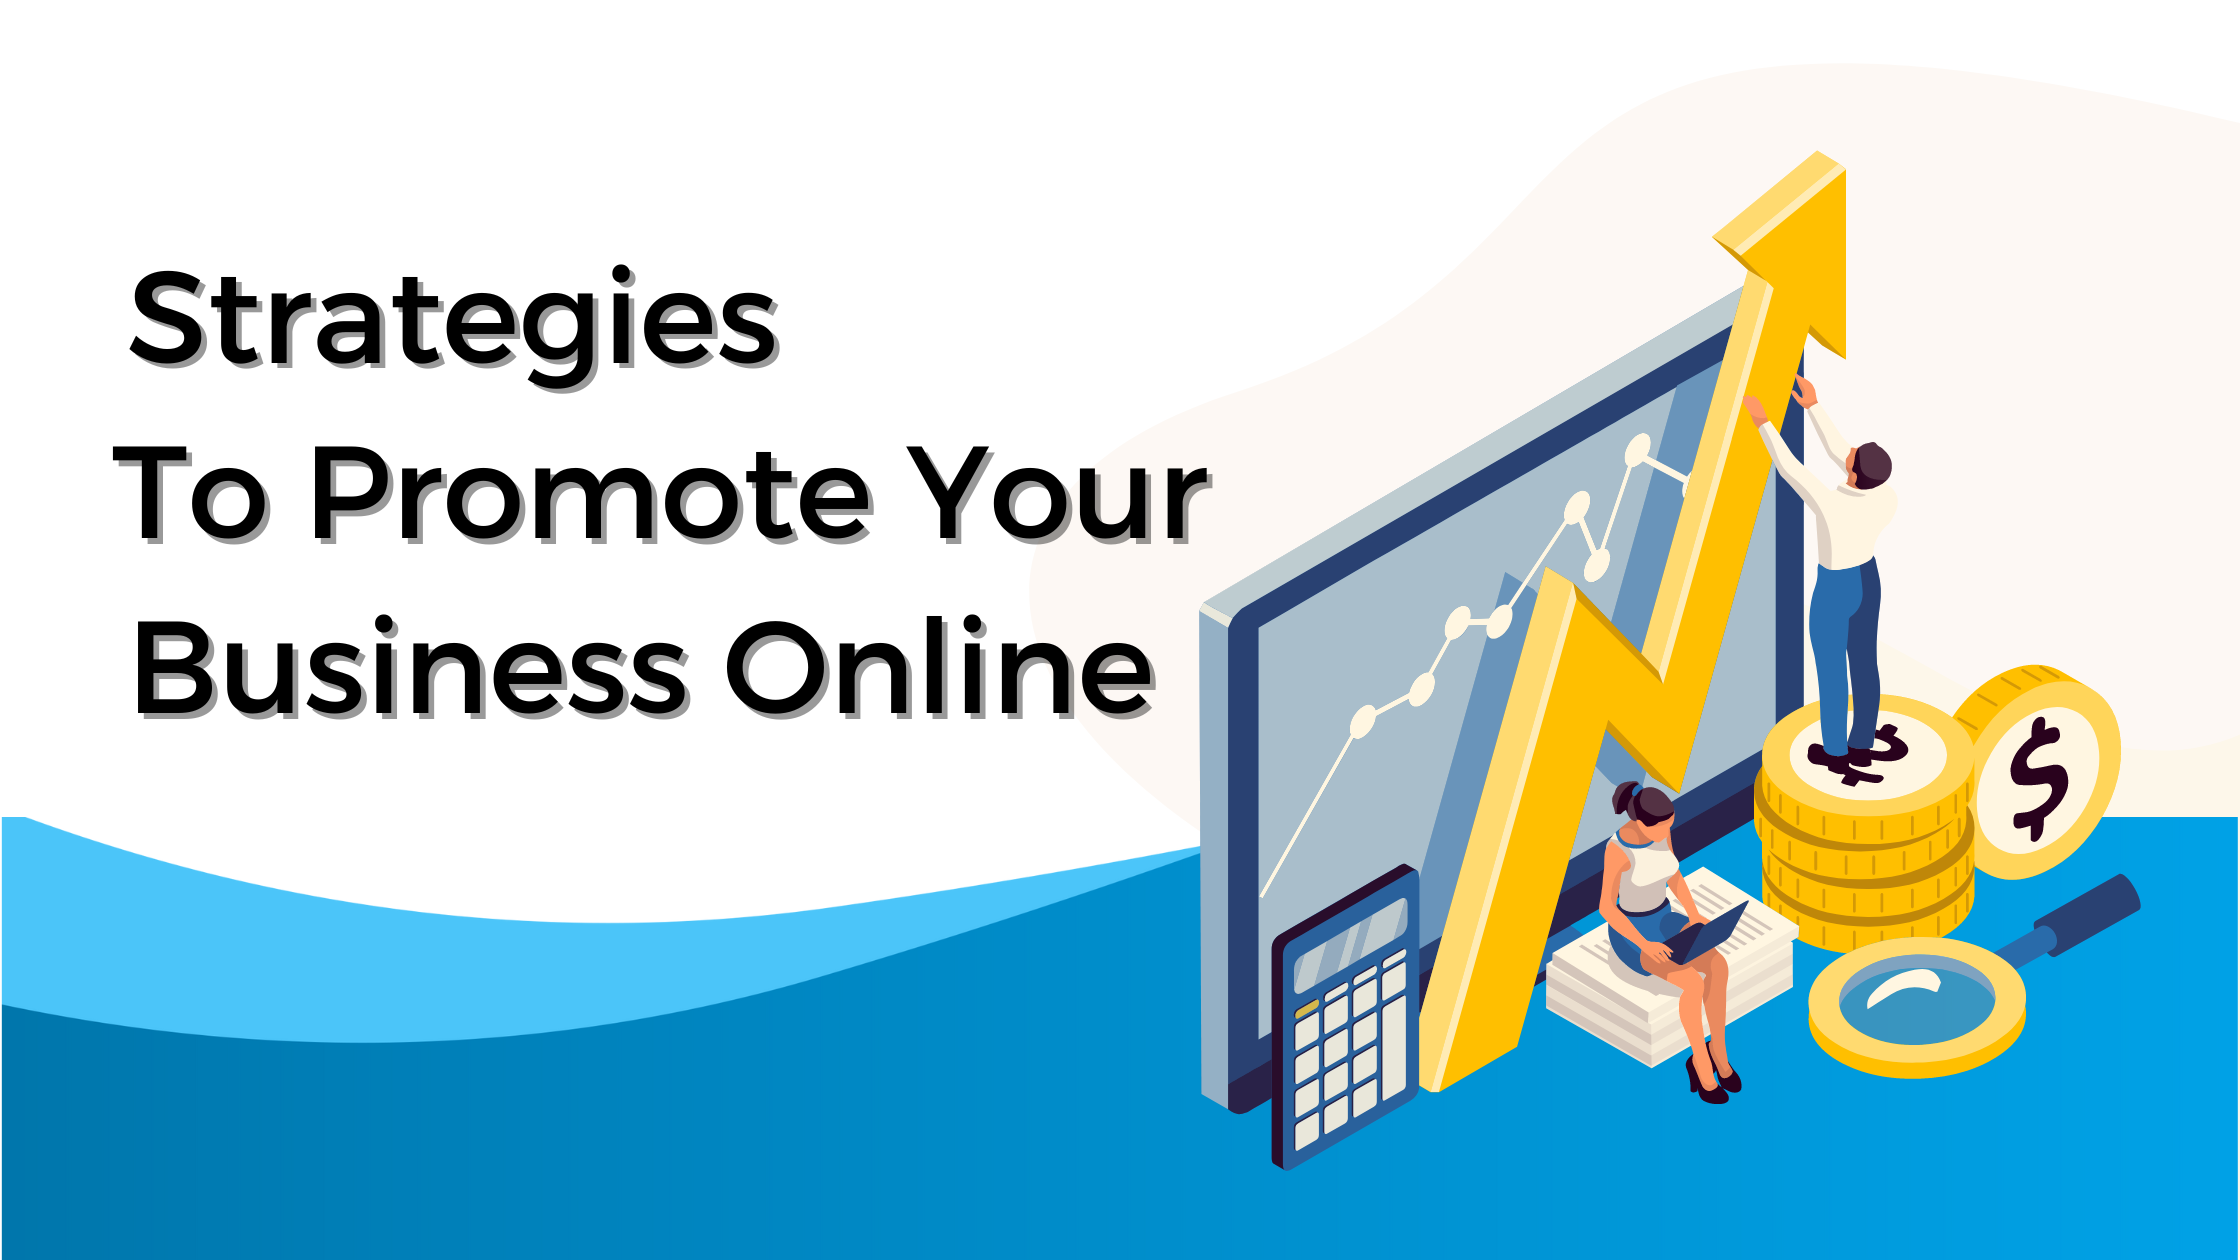 Strategies To Promote Your Business Online